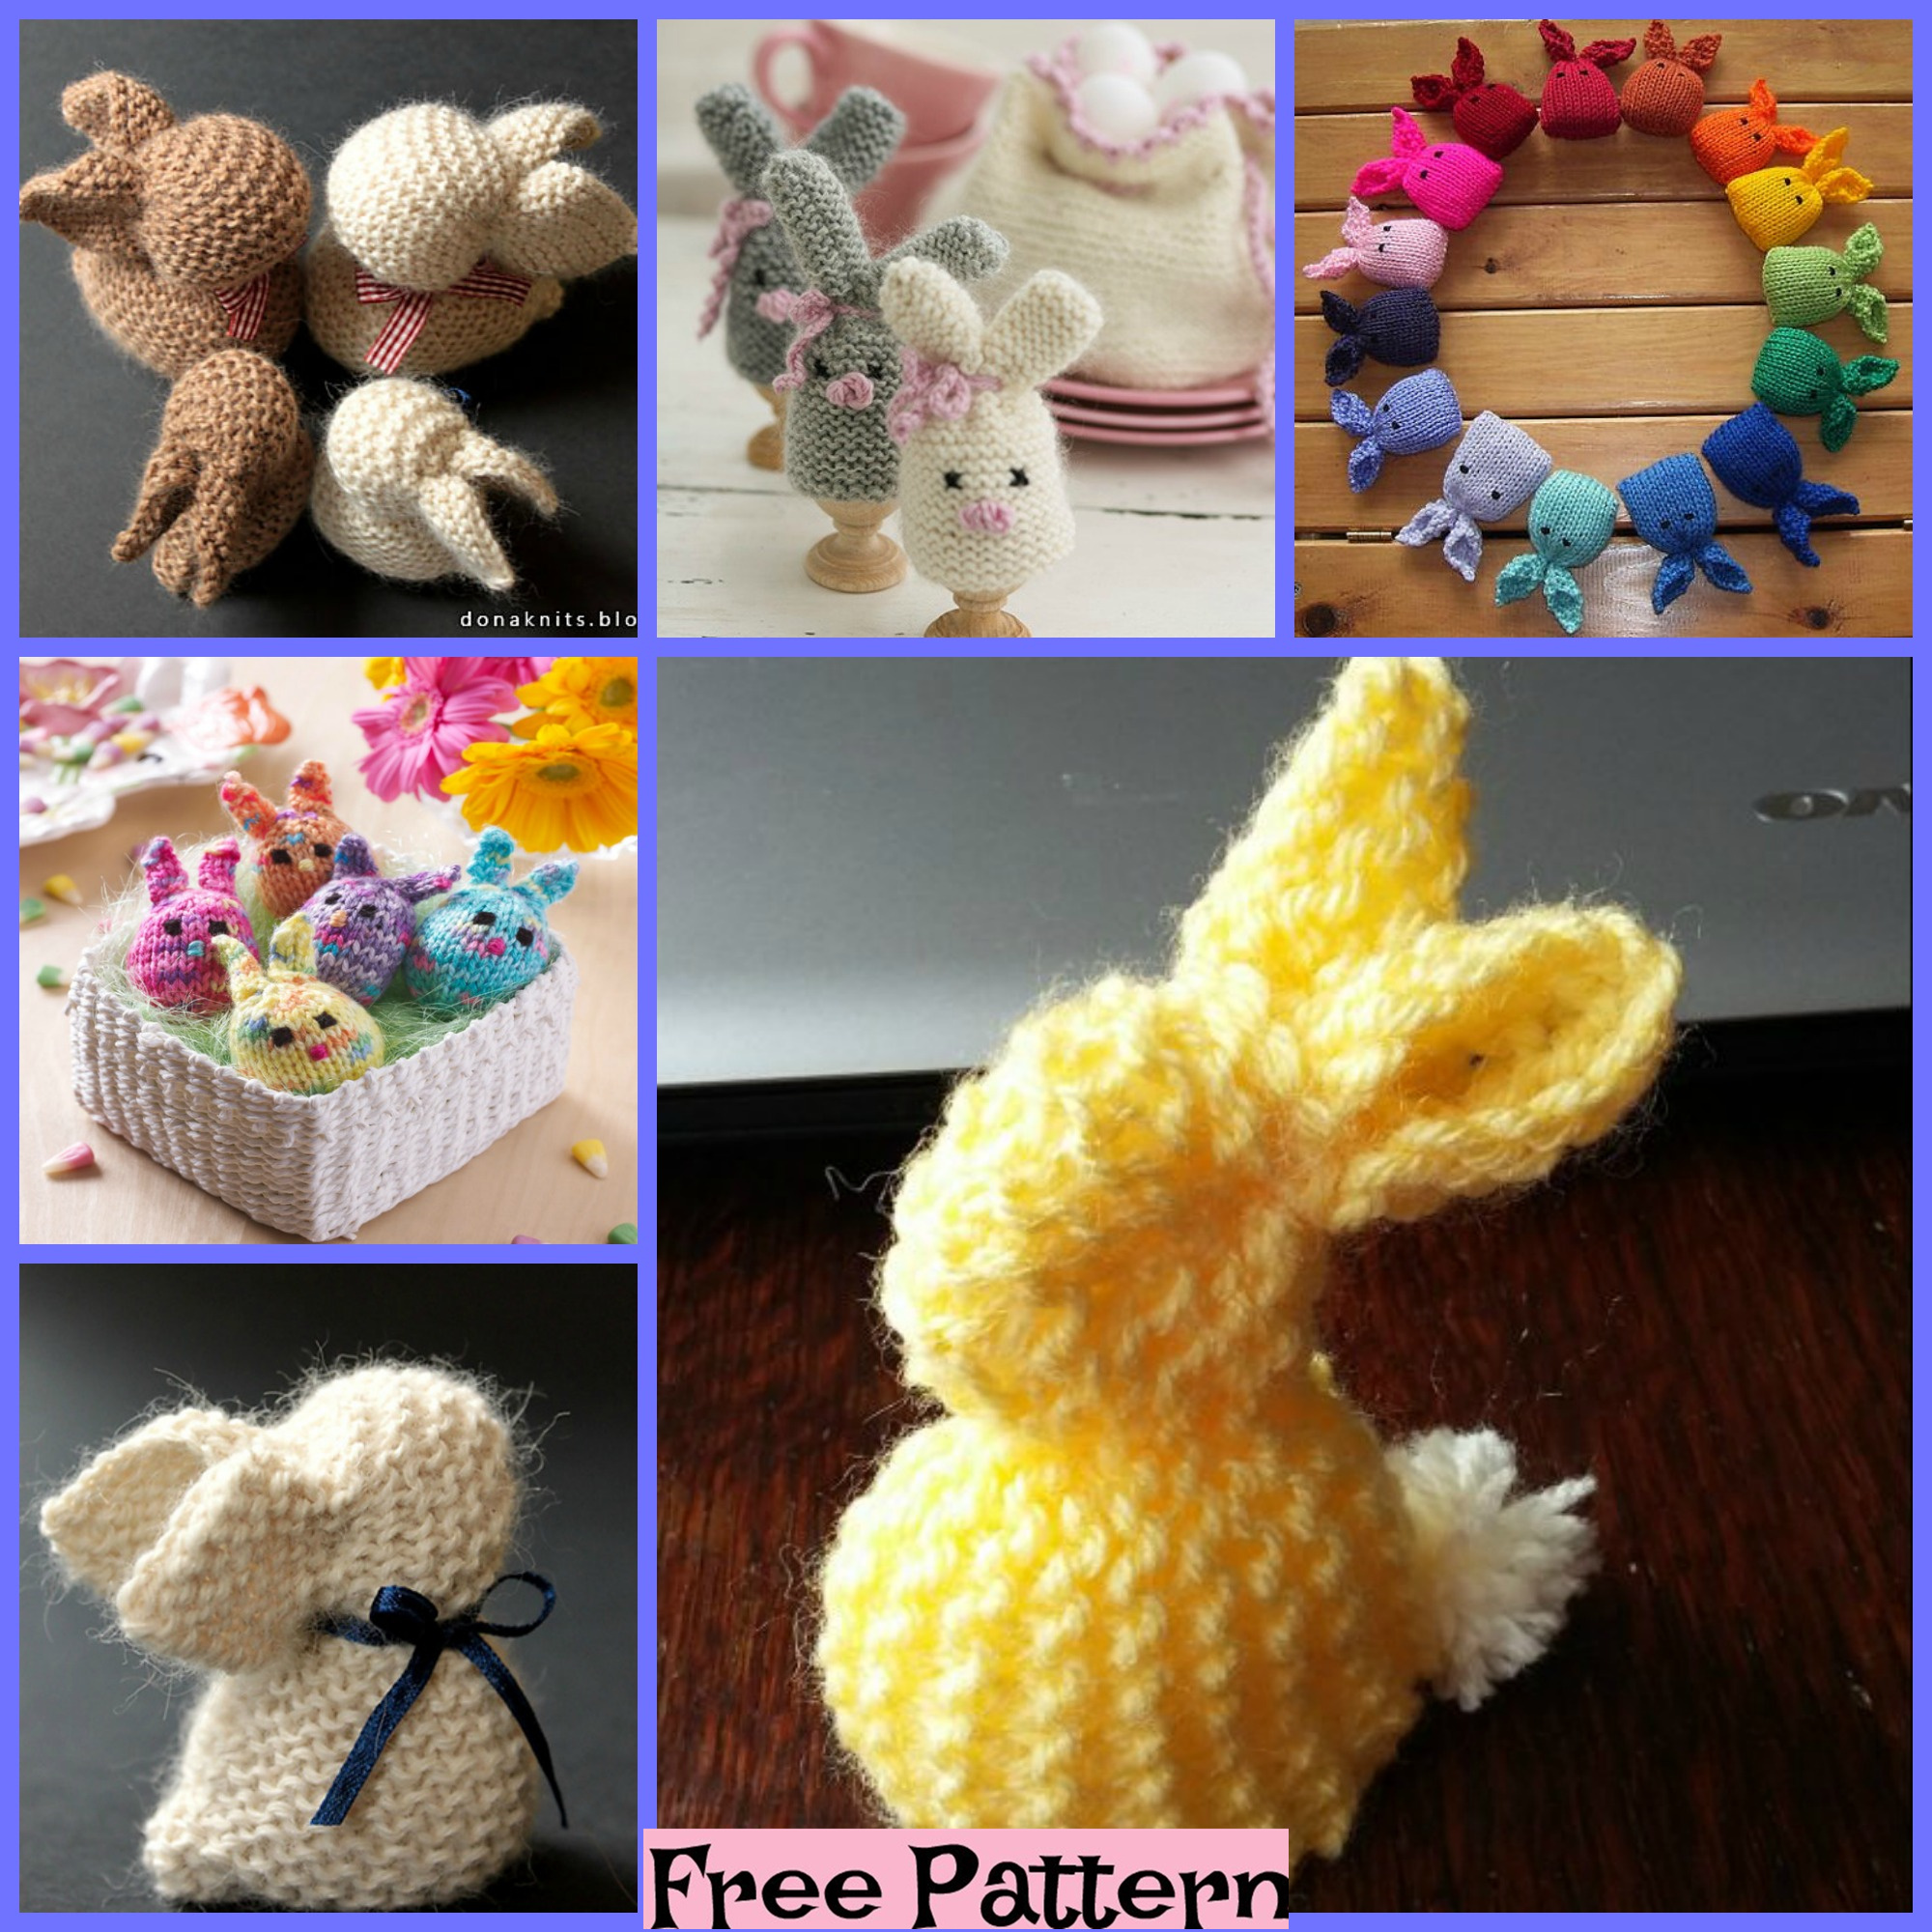 6 knitted Easter Bunnies Free Patterns DIY 4 EVER